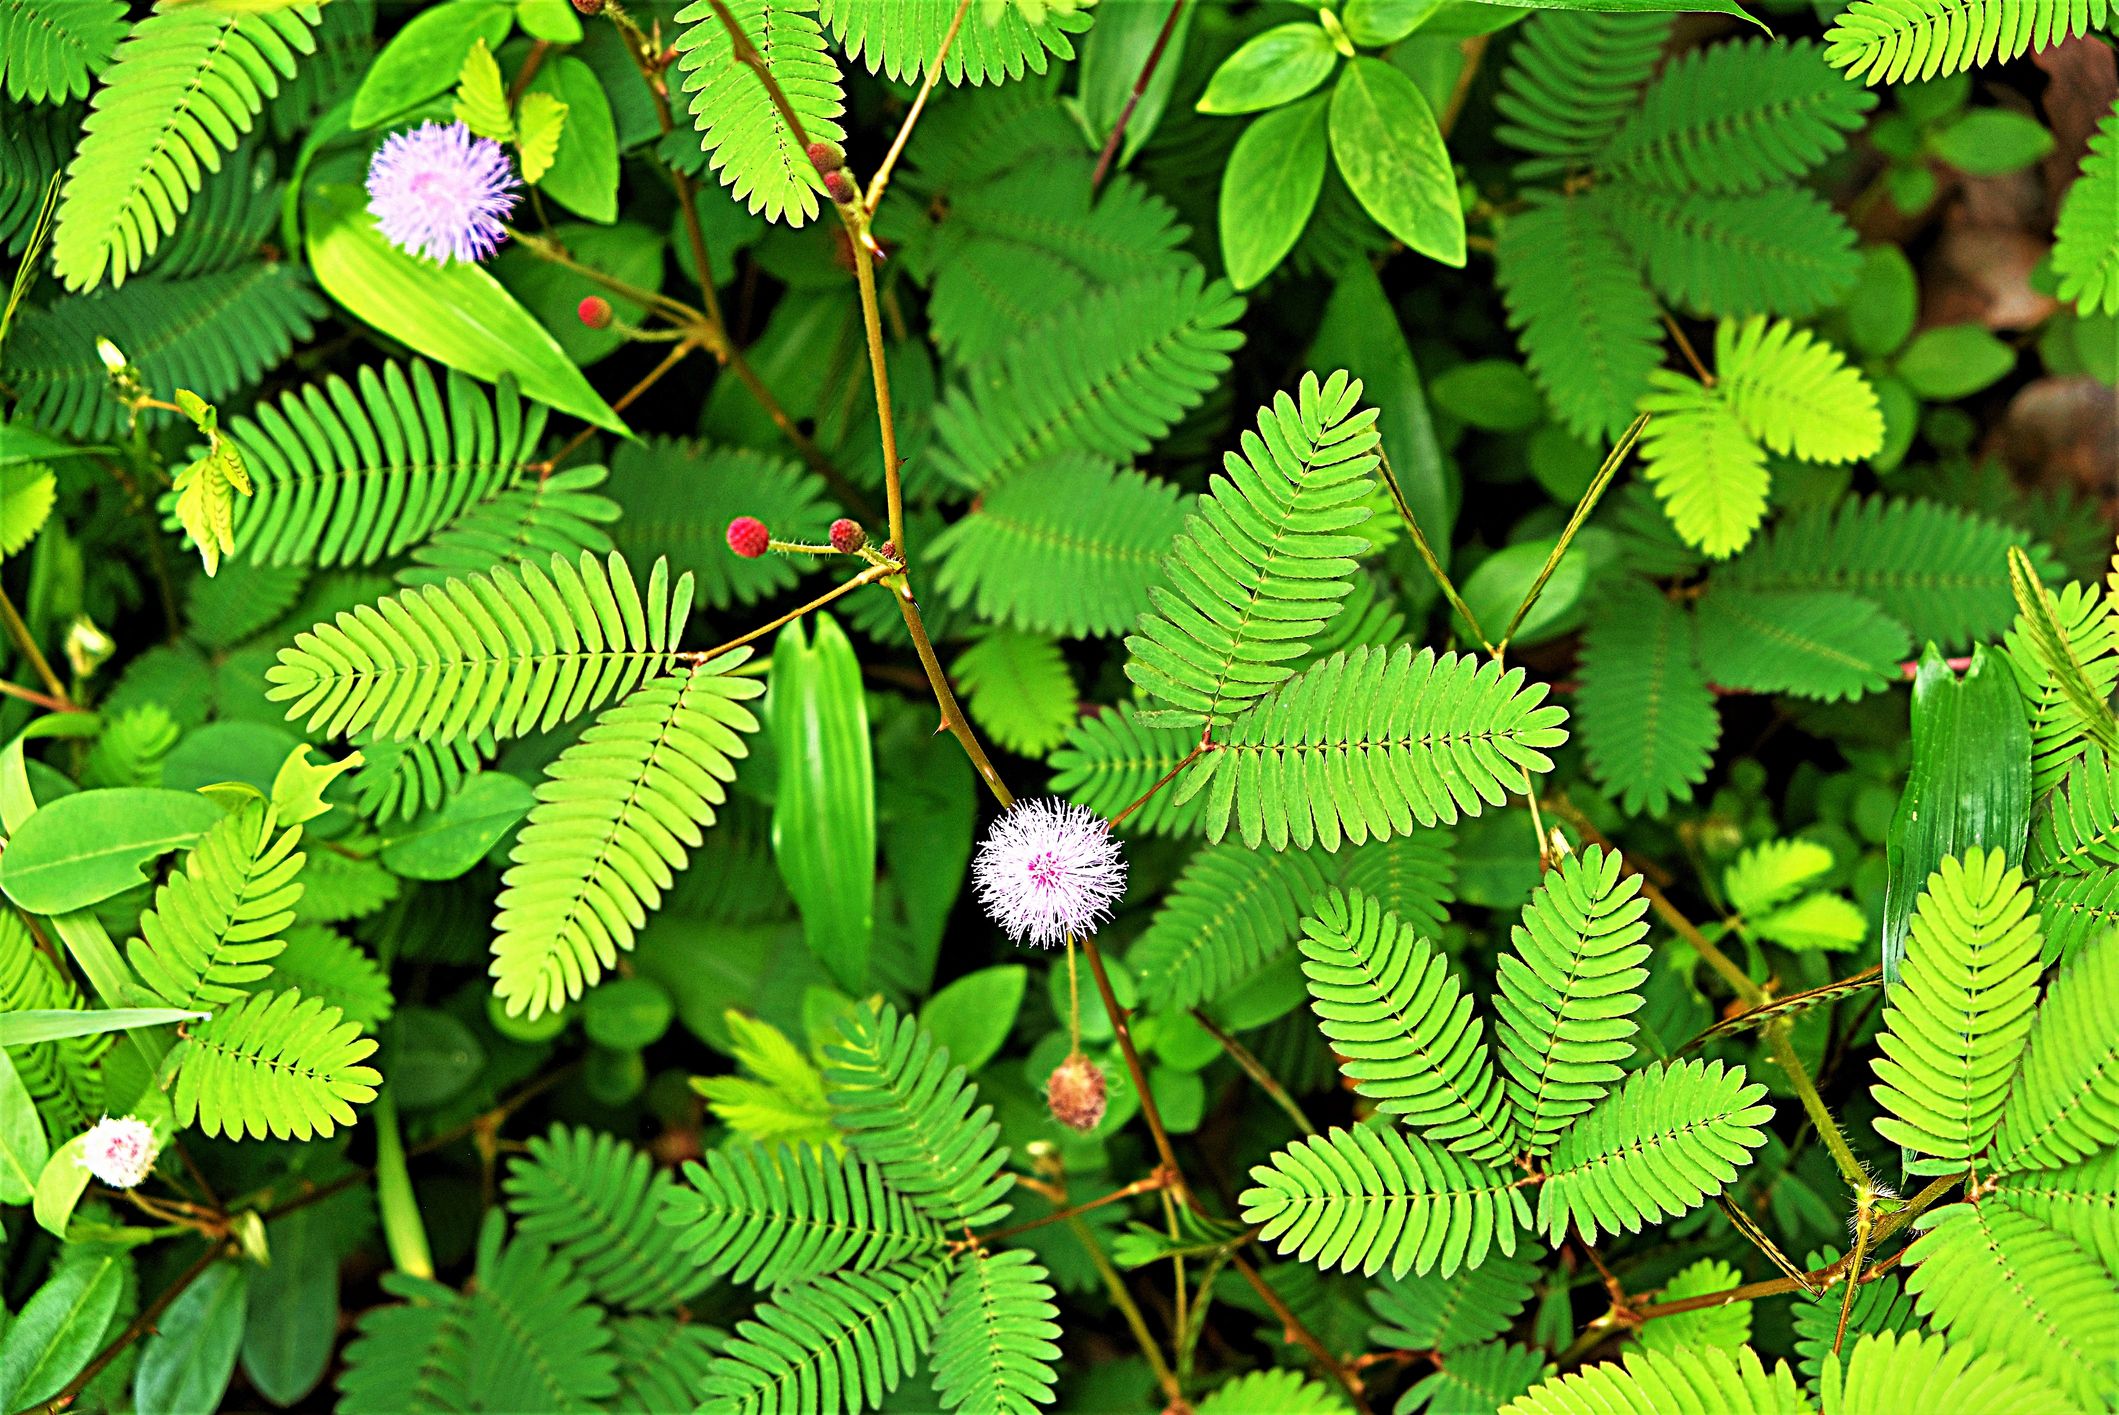 mimosa pudica flowers move when you touch them - touch-me-not plants